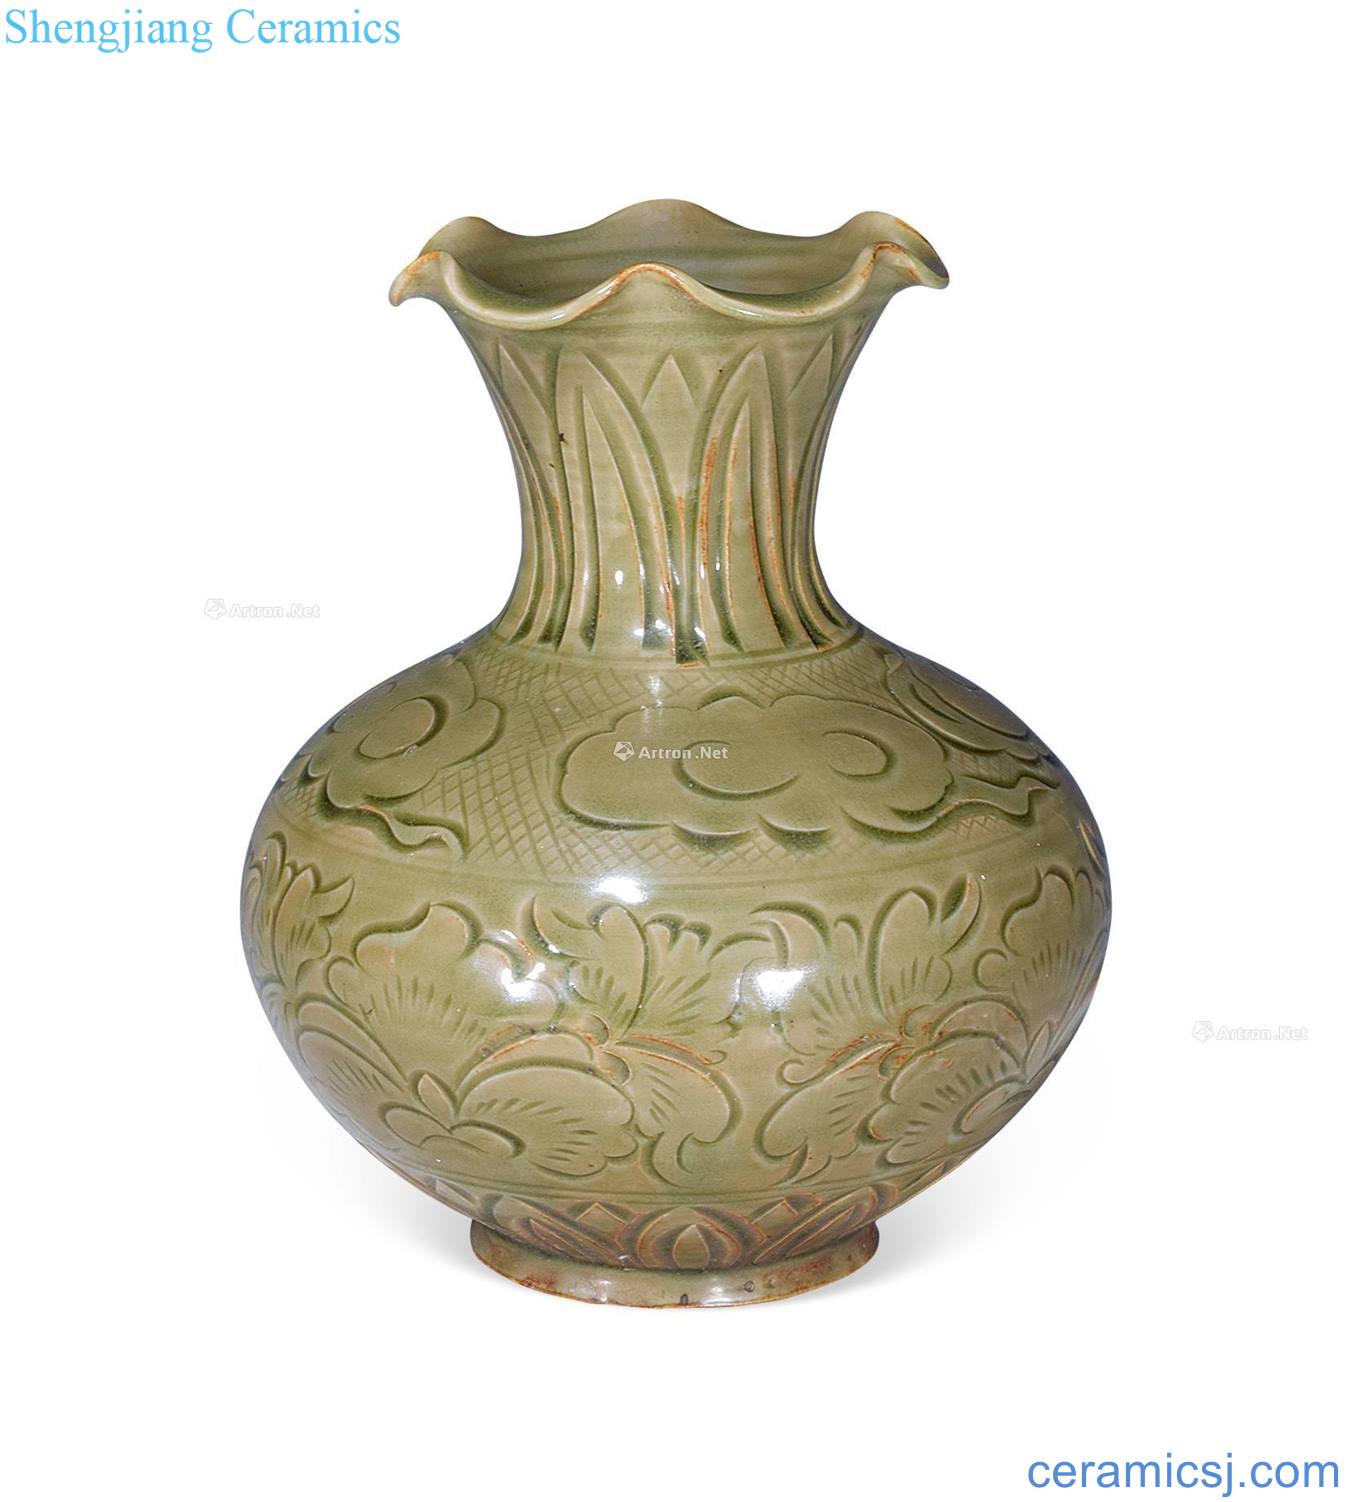 The southern song dynasty Yao state kiln carved flower bottle mouth